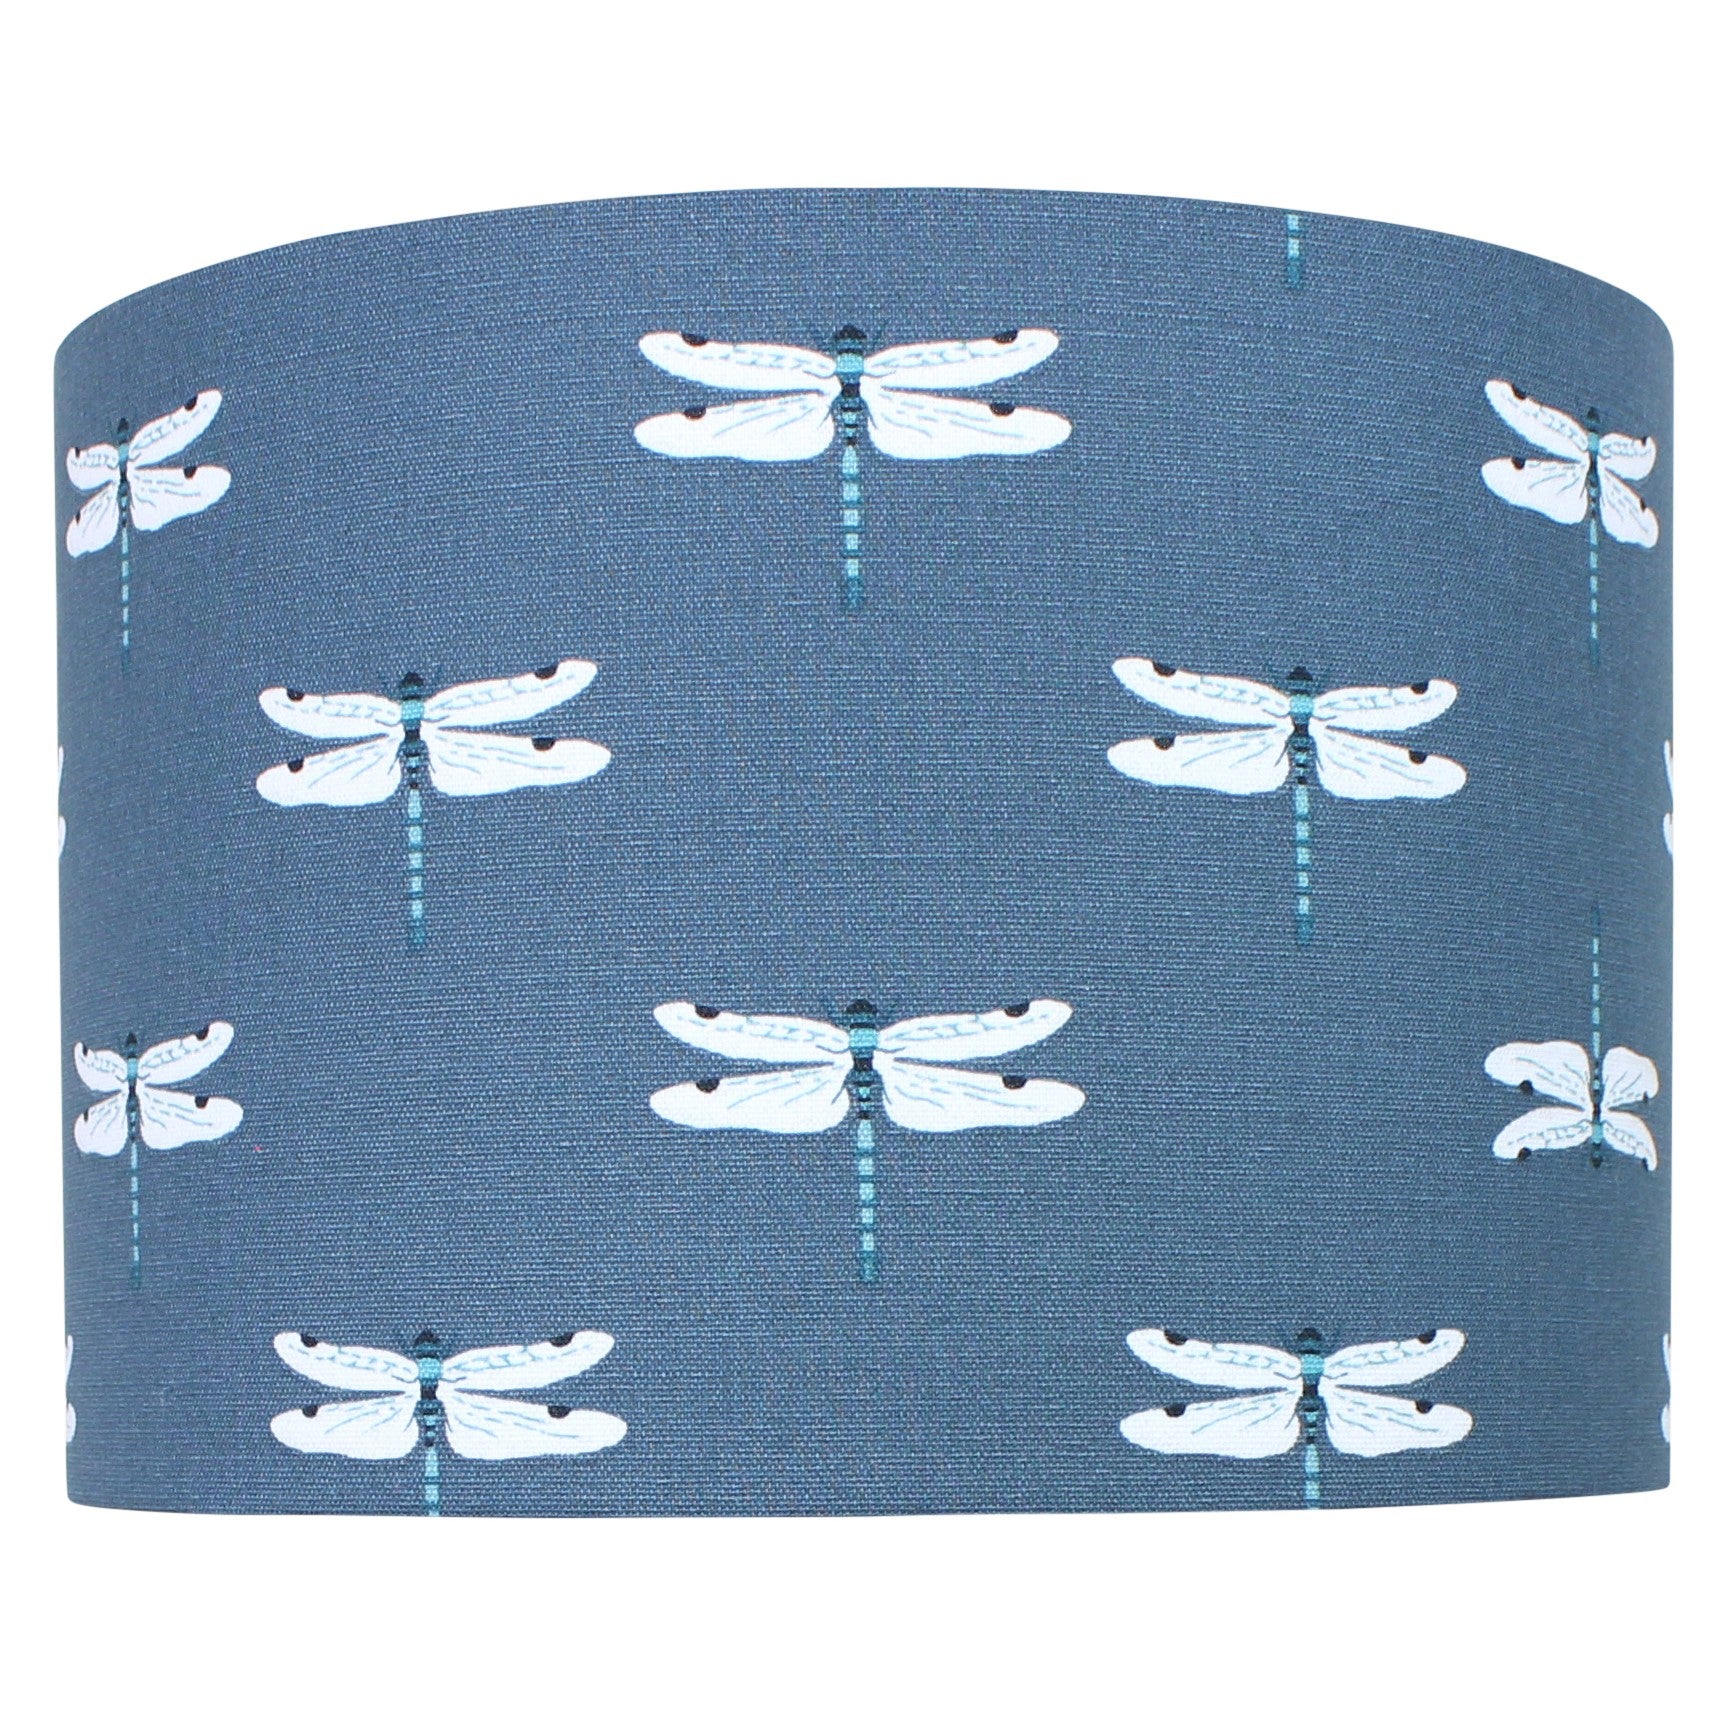 Dragonfly Sophie Allport Drum Lampshade